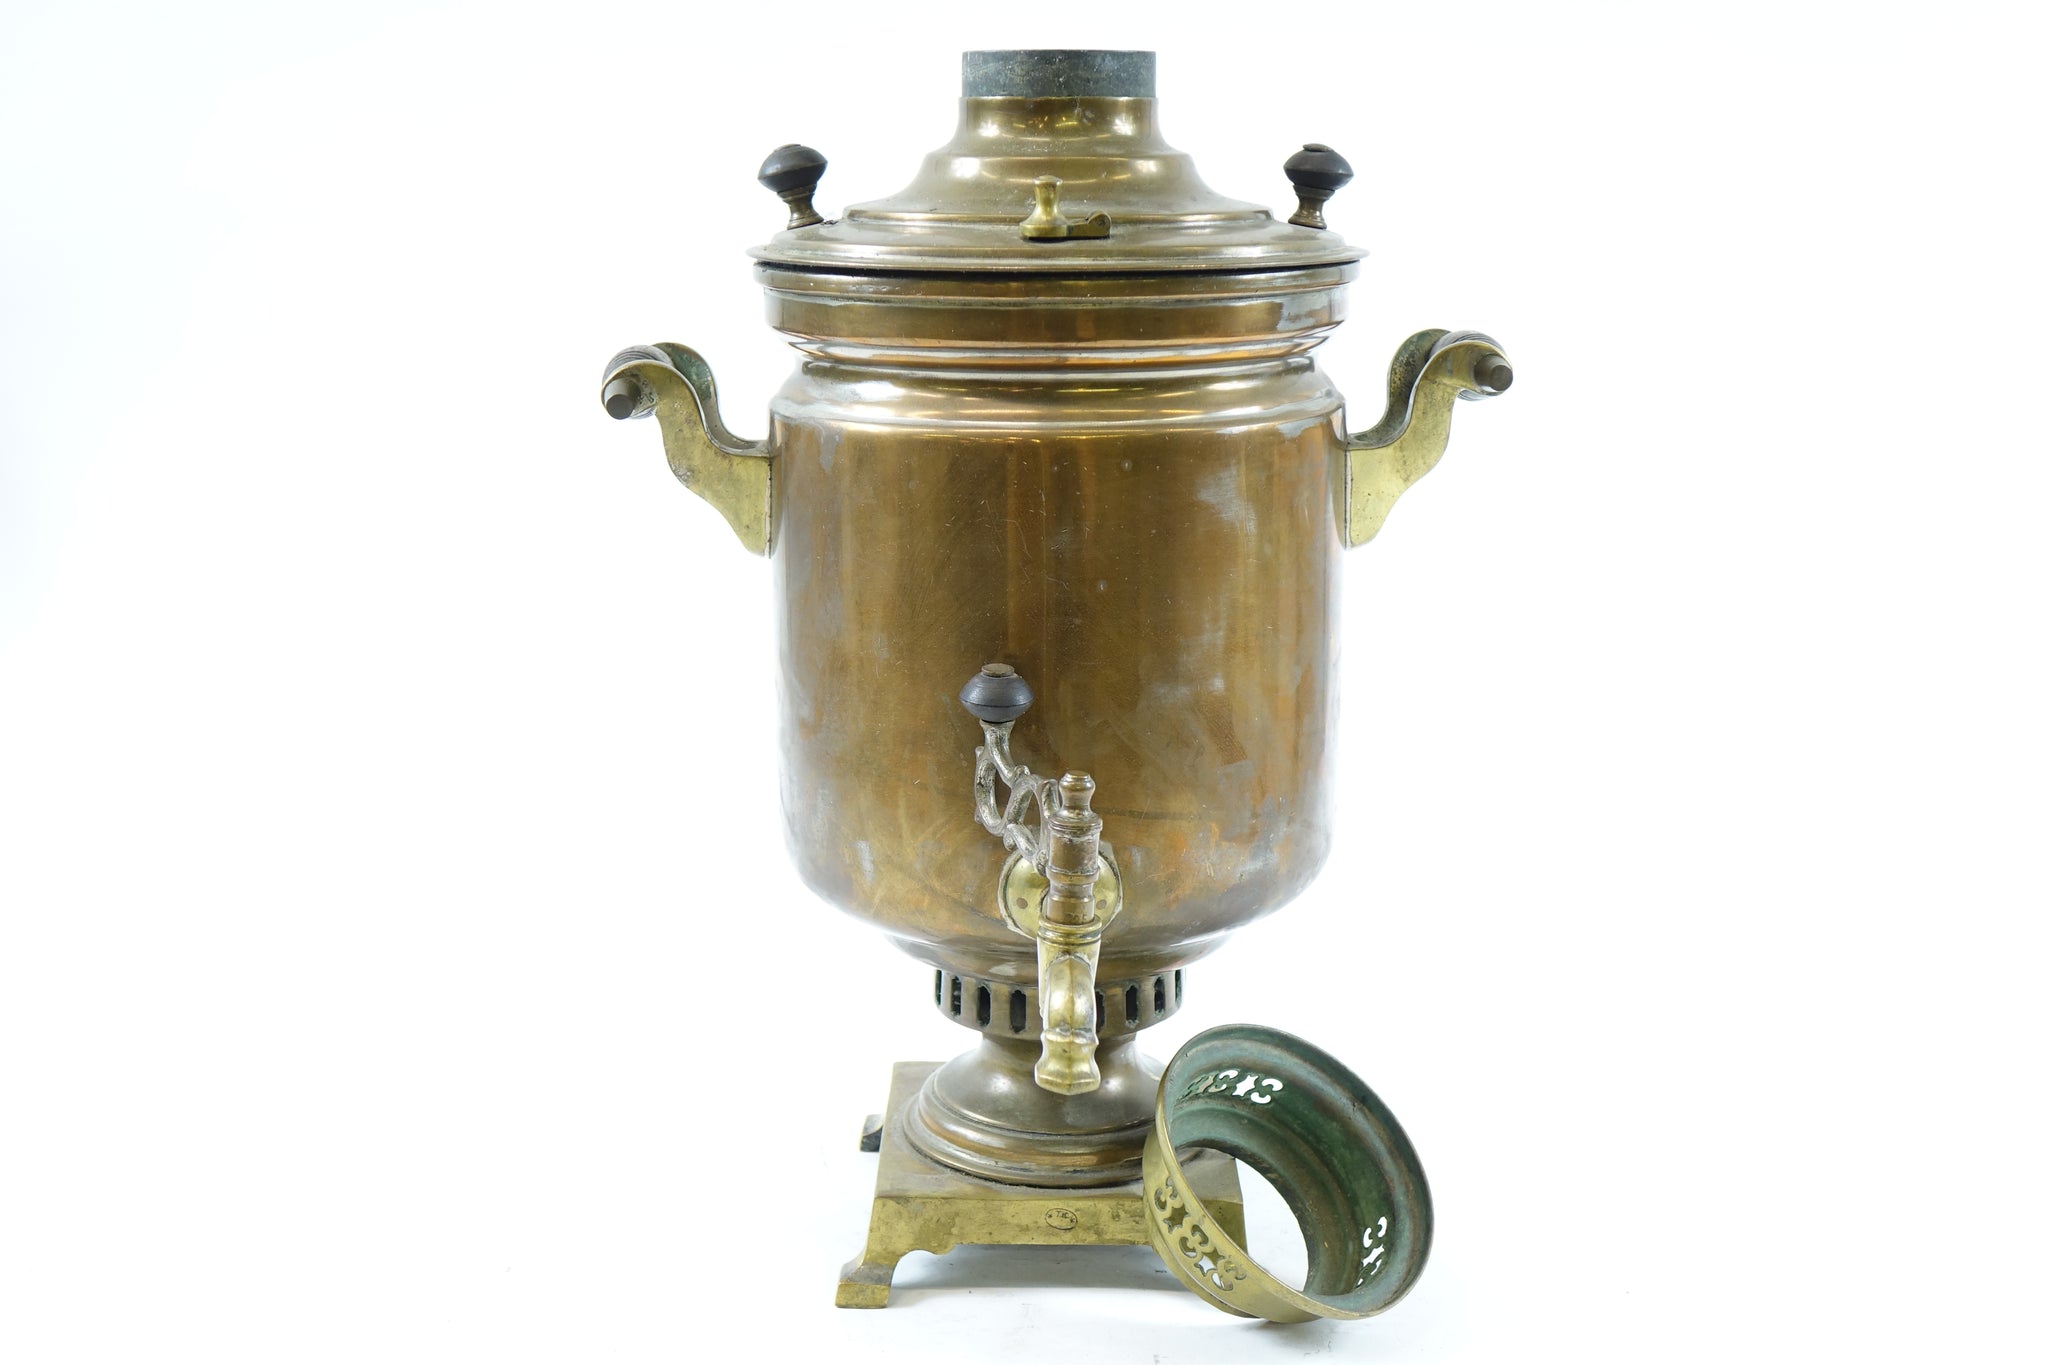 Buy the Antique Brass Samovar Russian or Middle Eastern